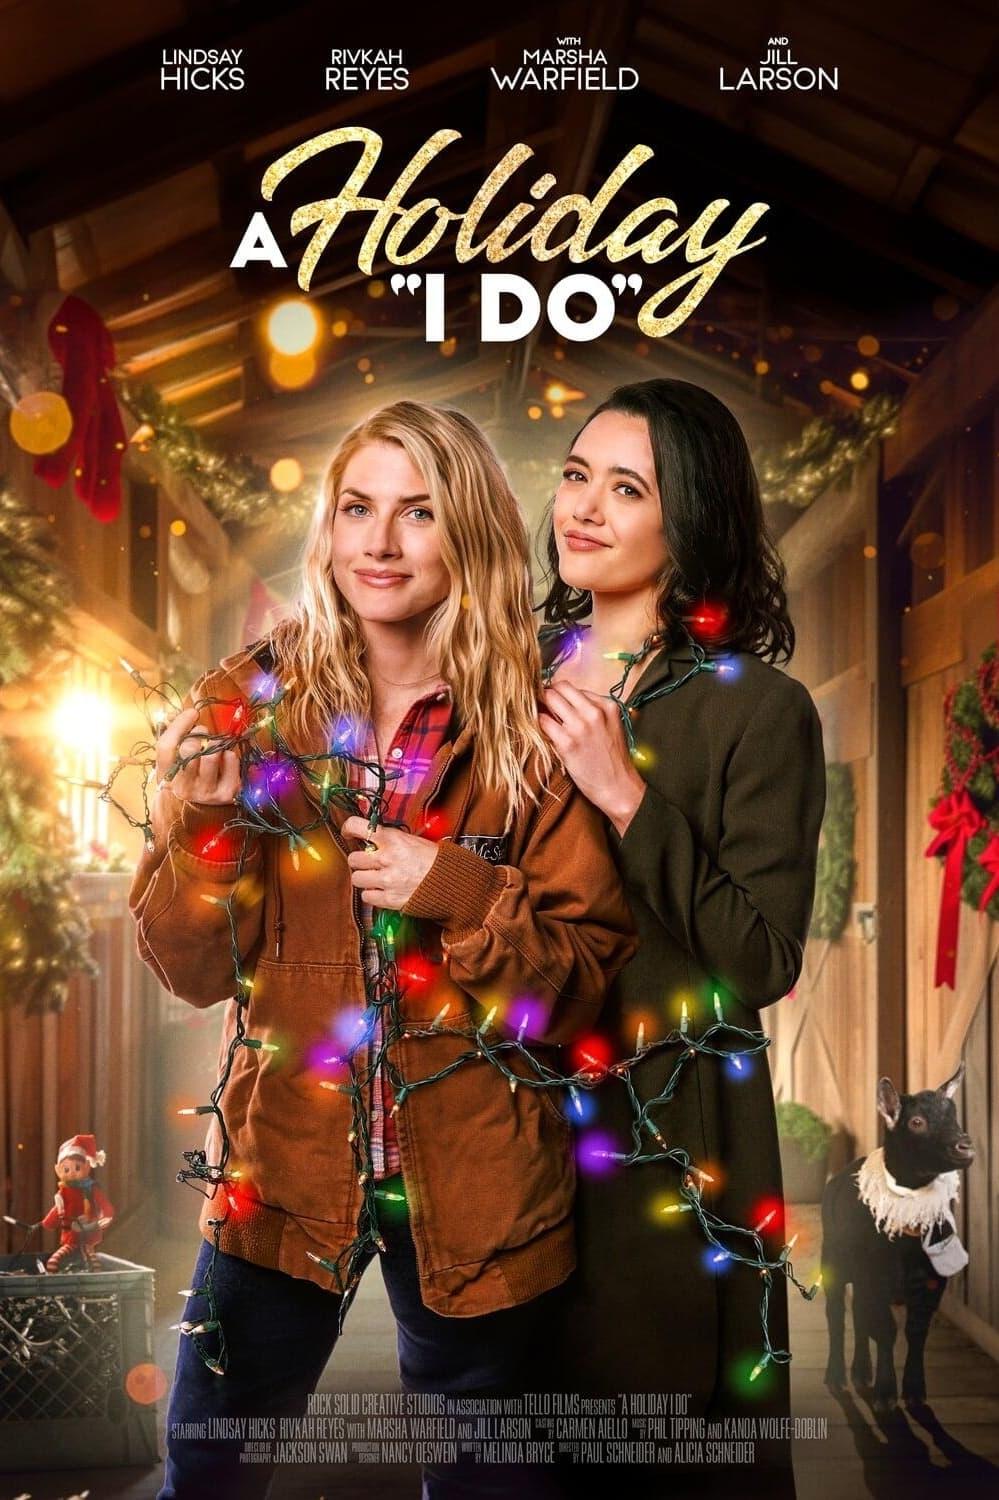 A Holiday I Do poster